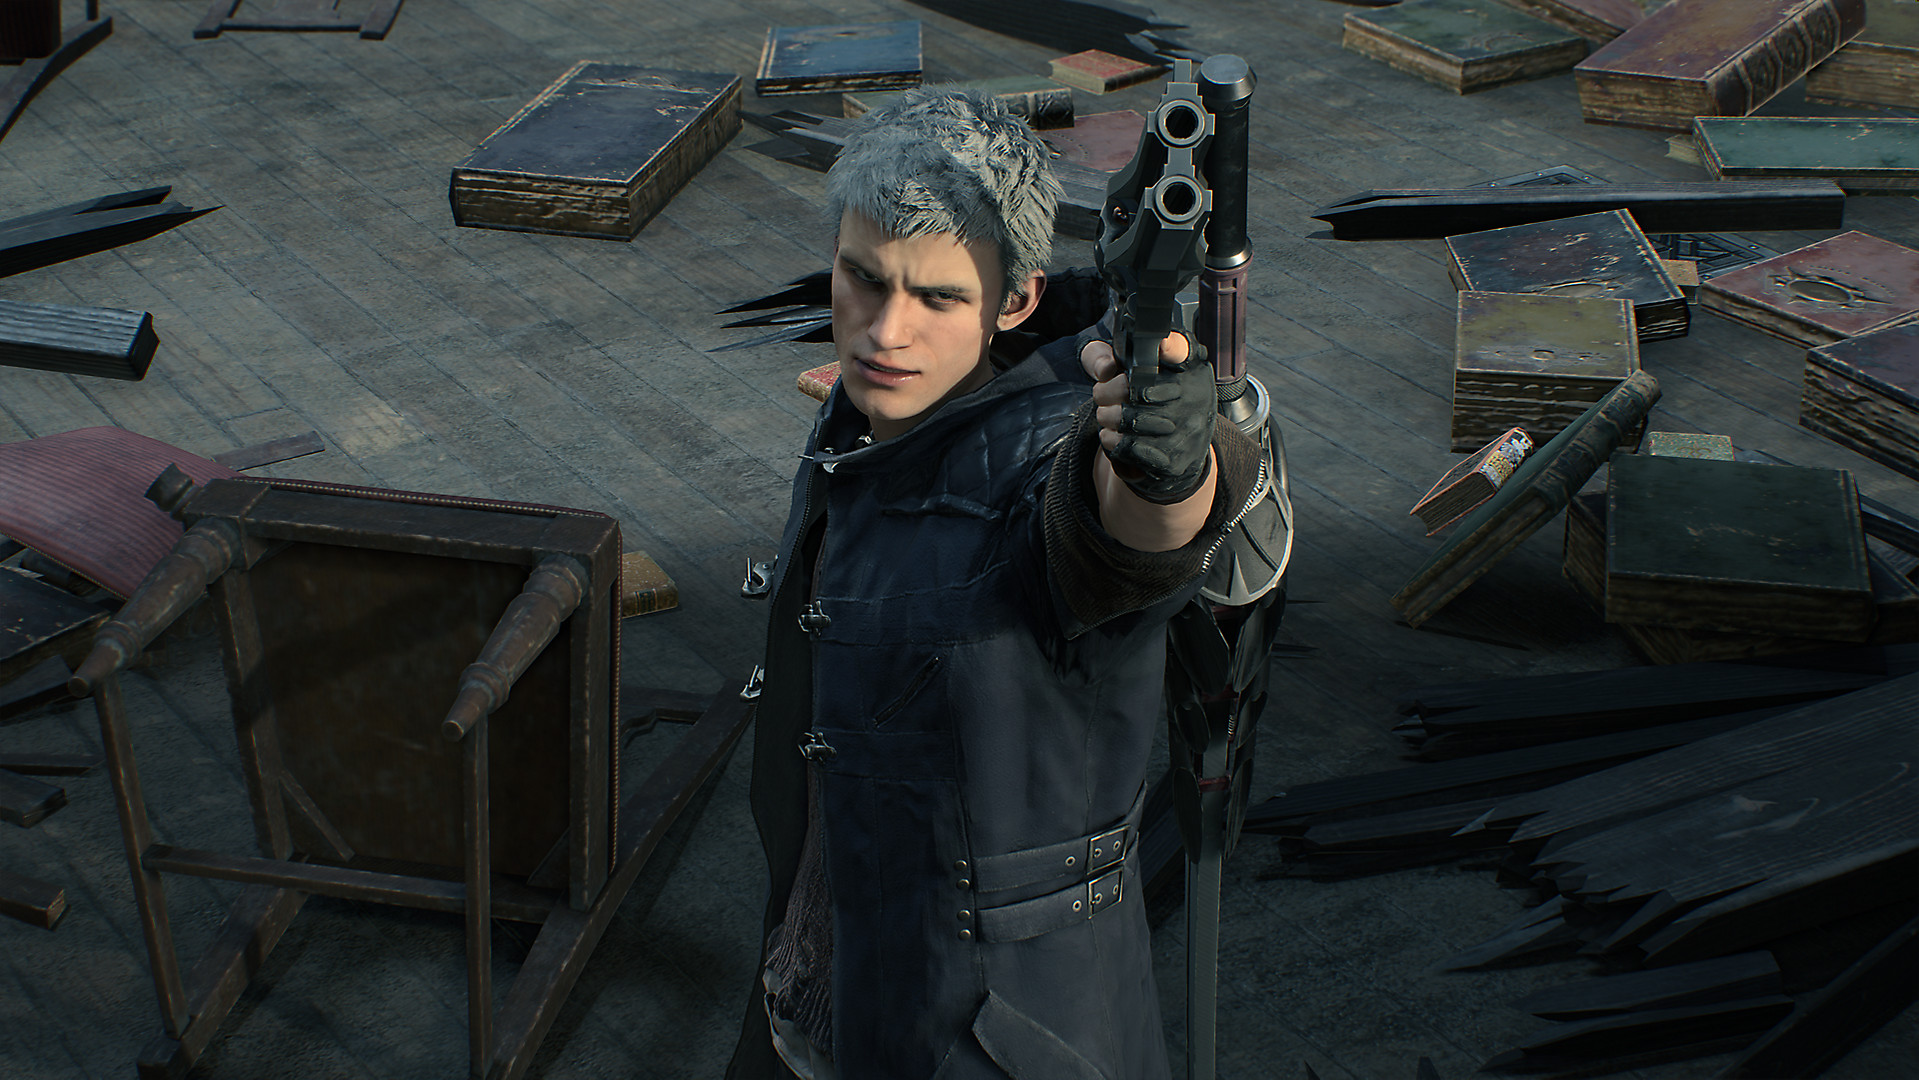 Media asset in full size related to 3dfxzone.it news item entitled as follows: Capcom pubblica il trailer in 4K di Devil May Cry 5 a pochi giorni dal lancio | Image Name: news29318_Devil-May-Cry-5-Screenshot_1.jpg